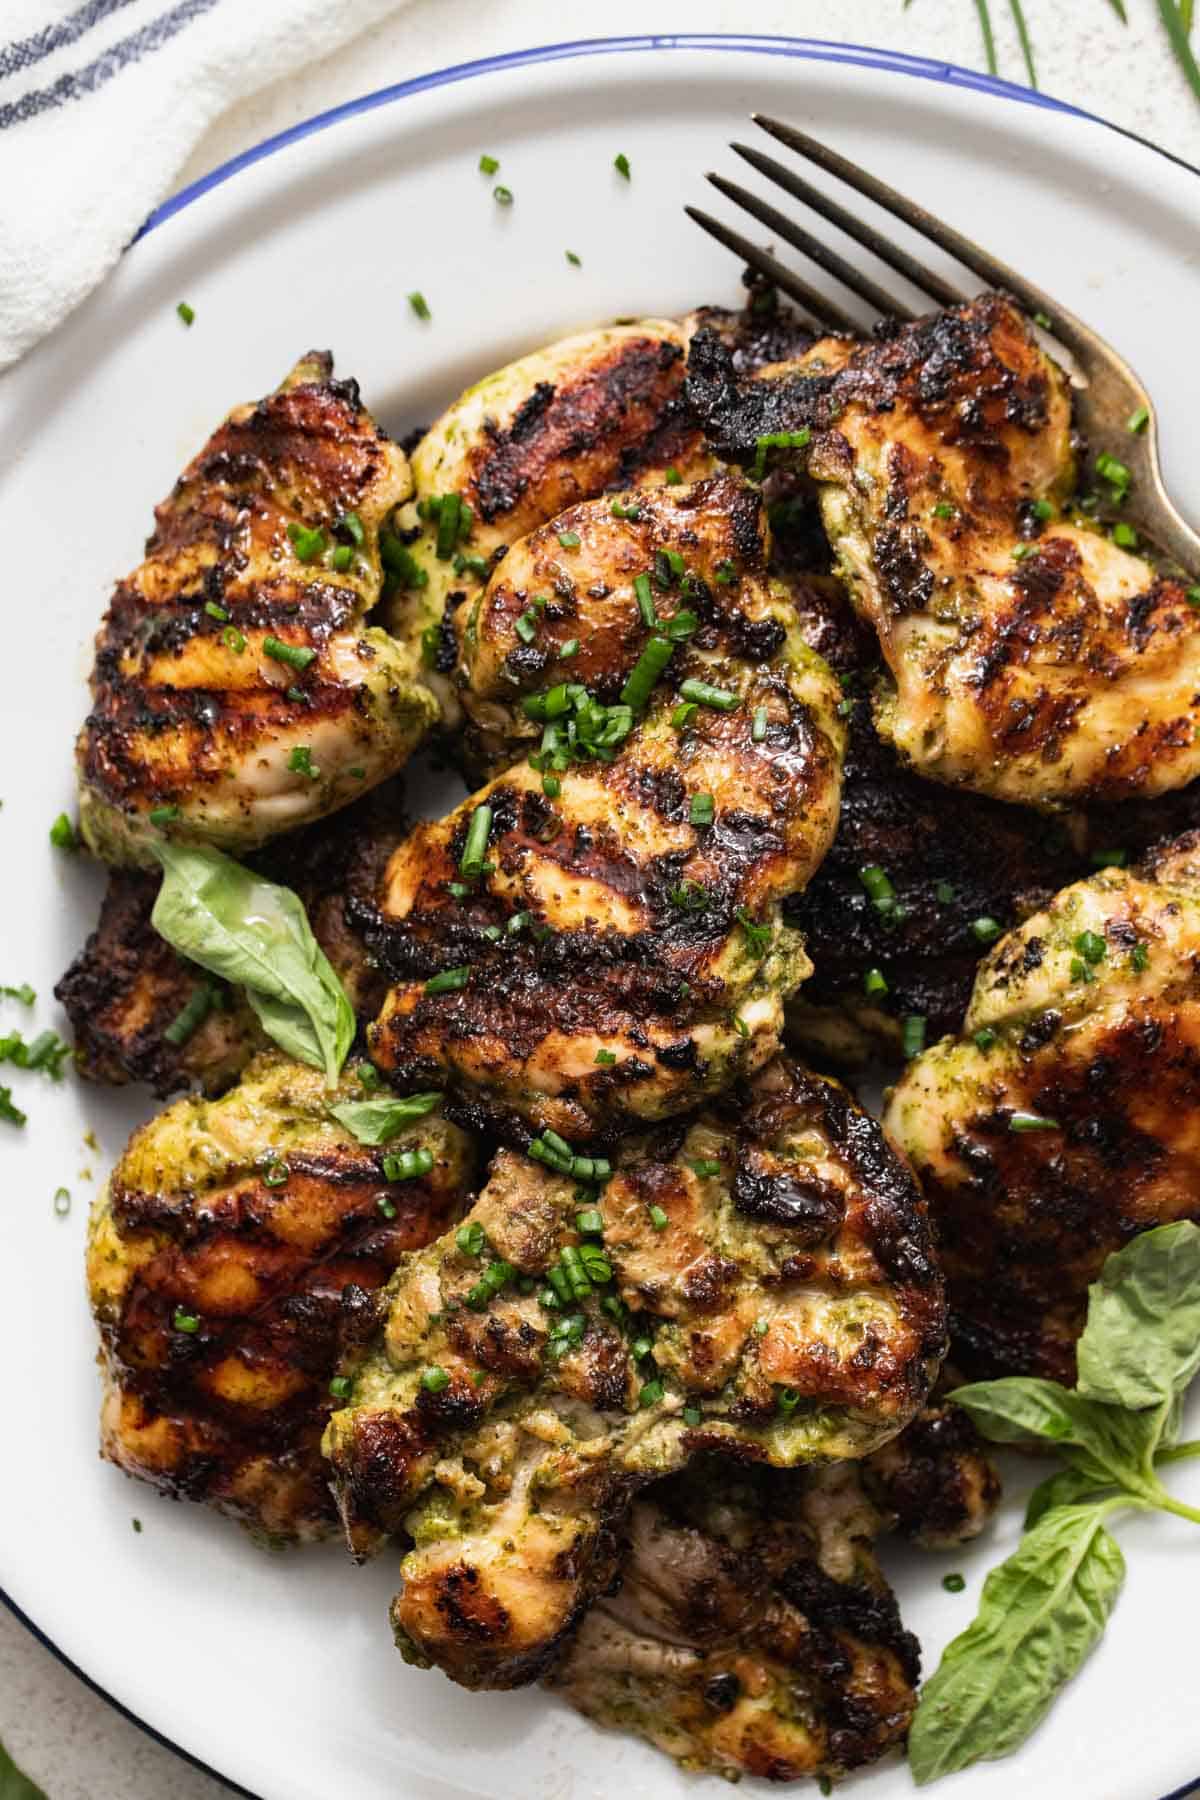 Grilled chicken thighs on a white plate with basil leaves and chives on top.